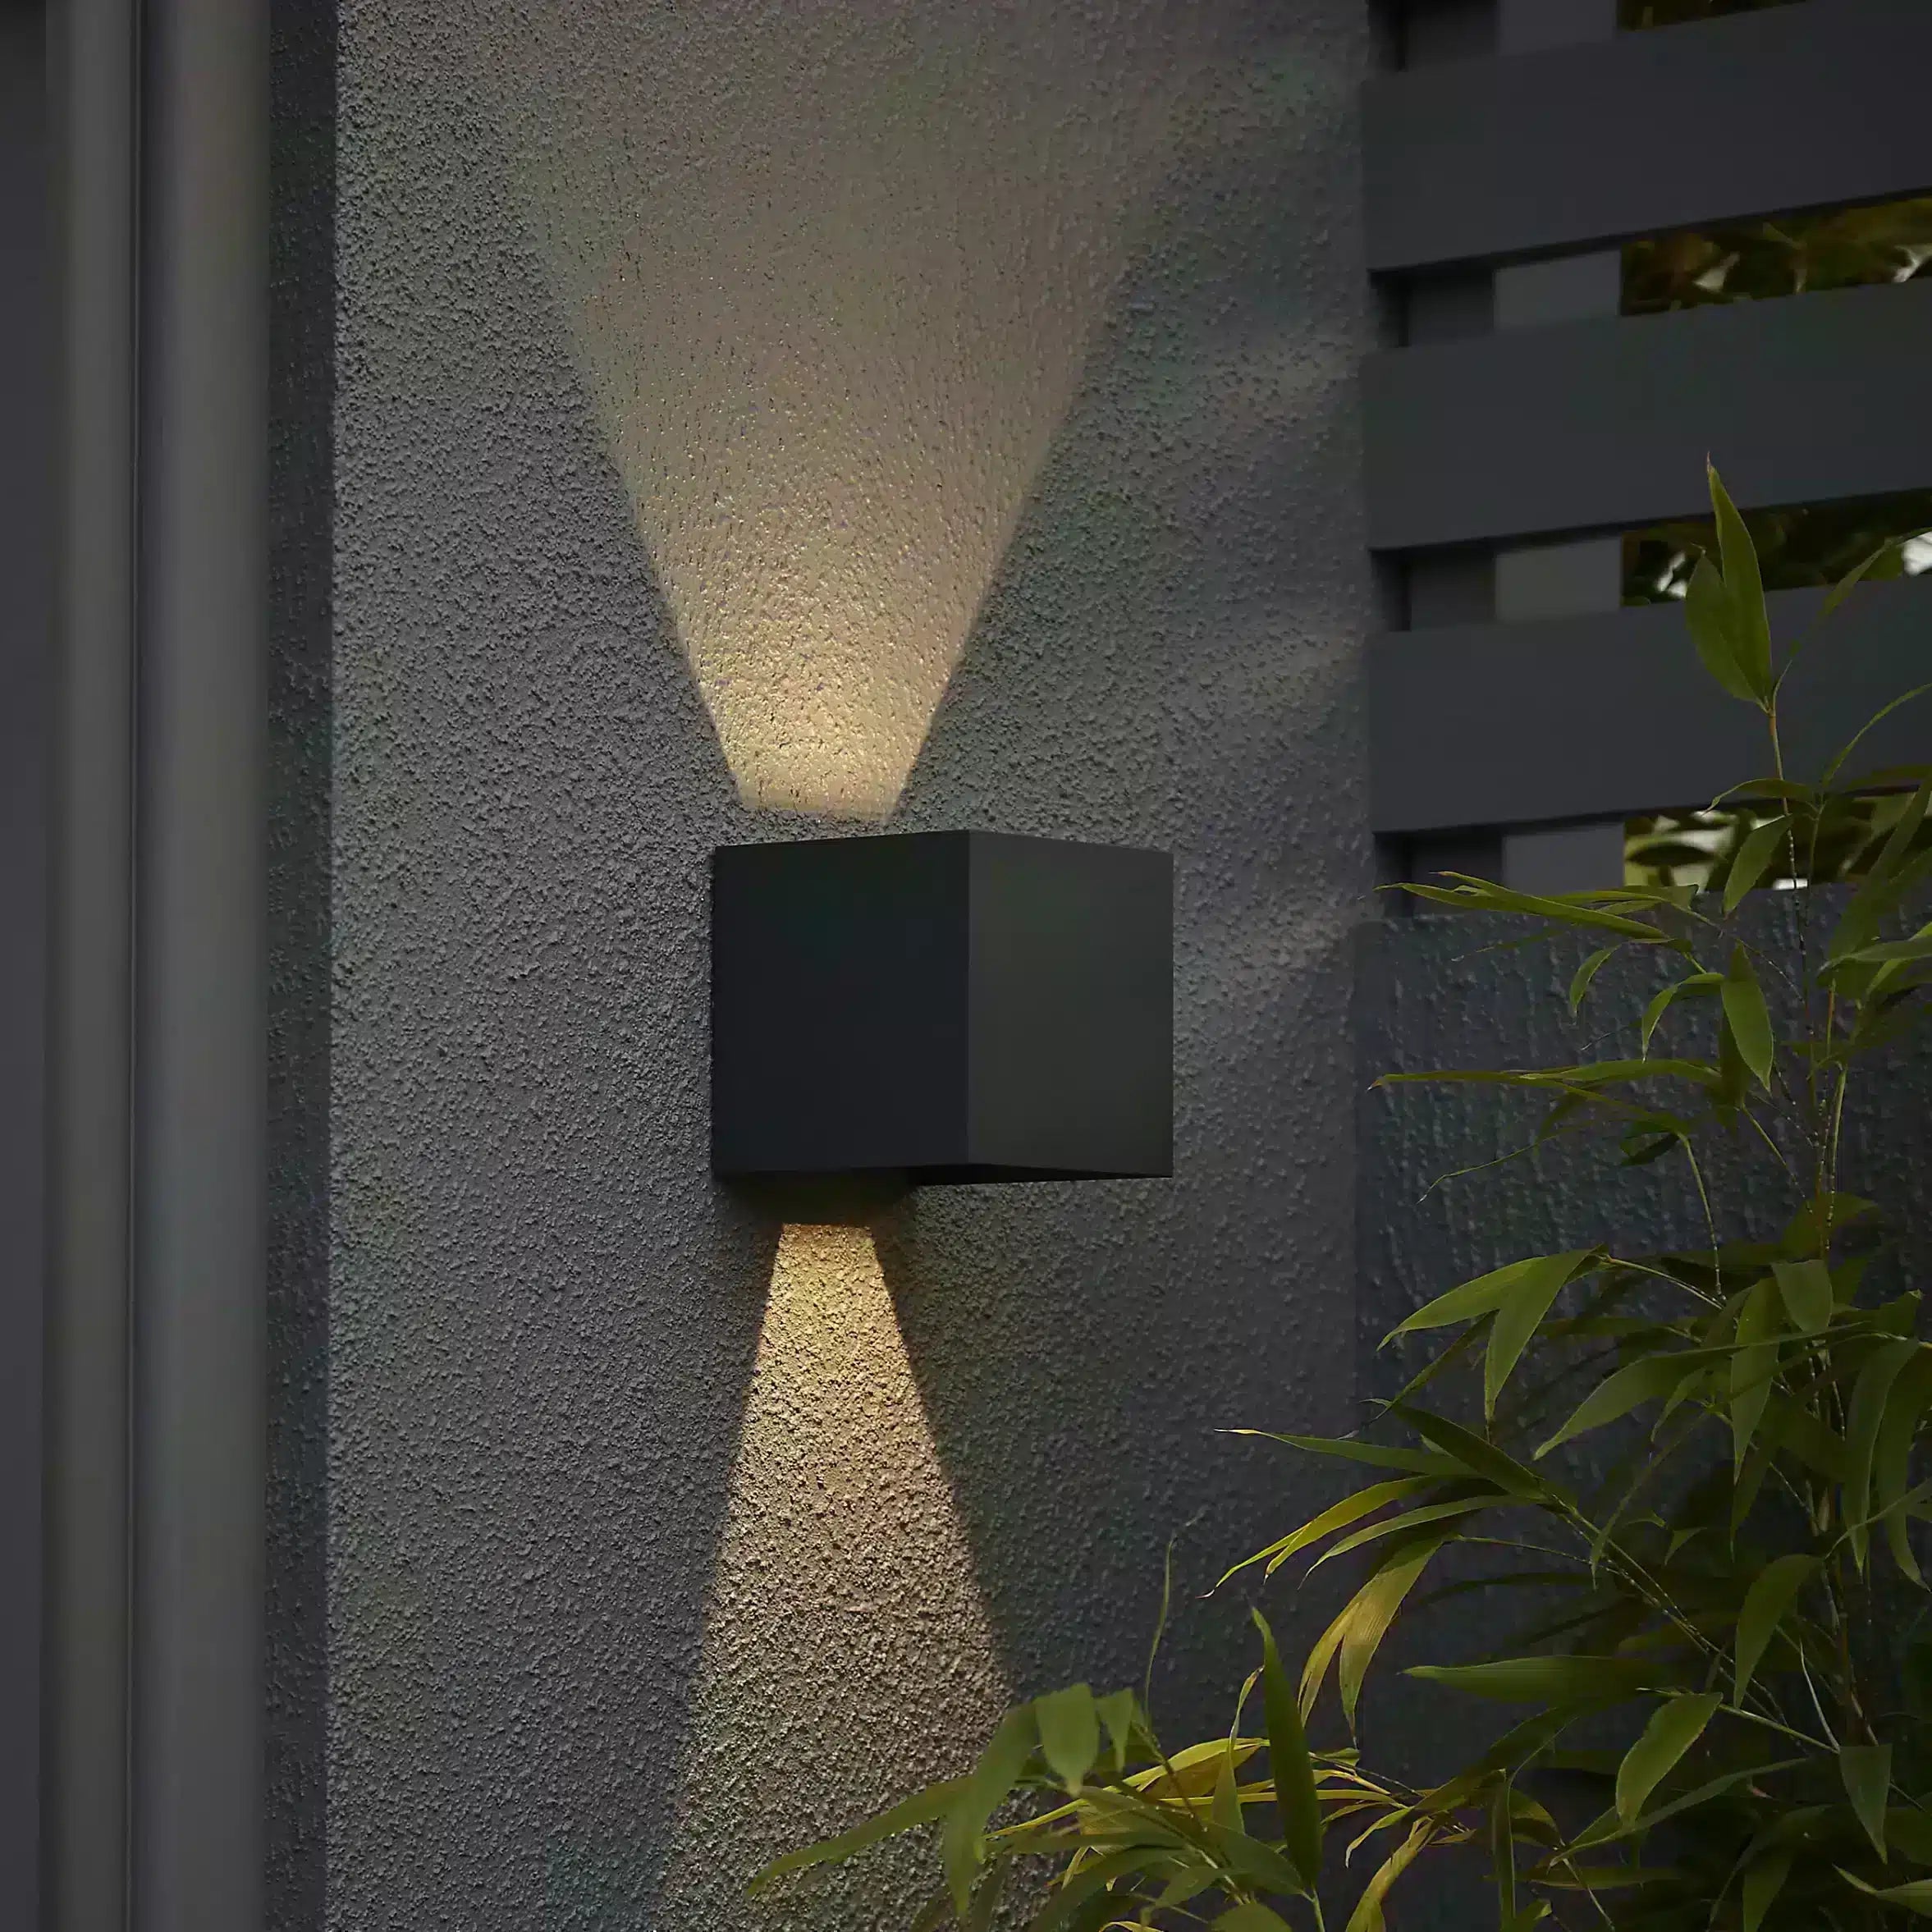 GoodHome Adjustable Matt Dark grey Mains-powered Integrated LED Outdoor Double Square Wall light 814lm 7922